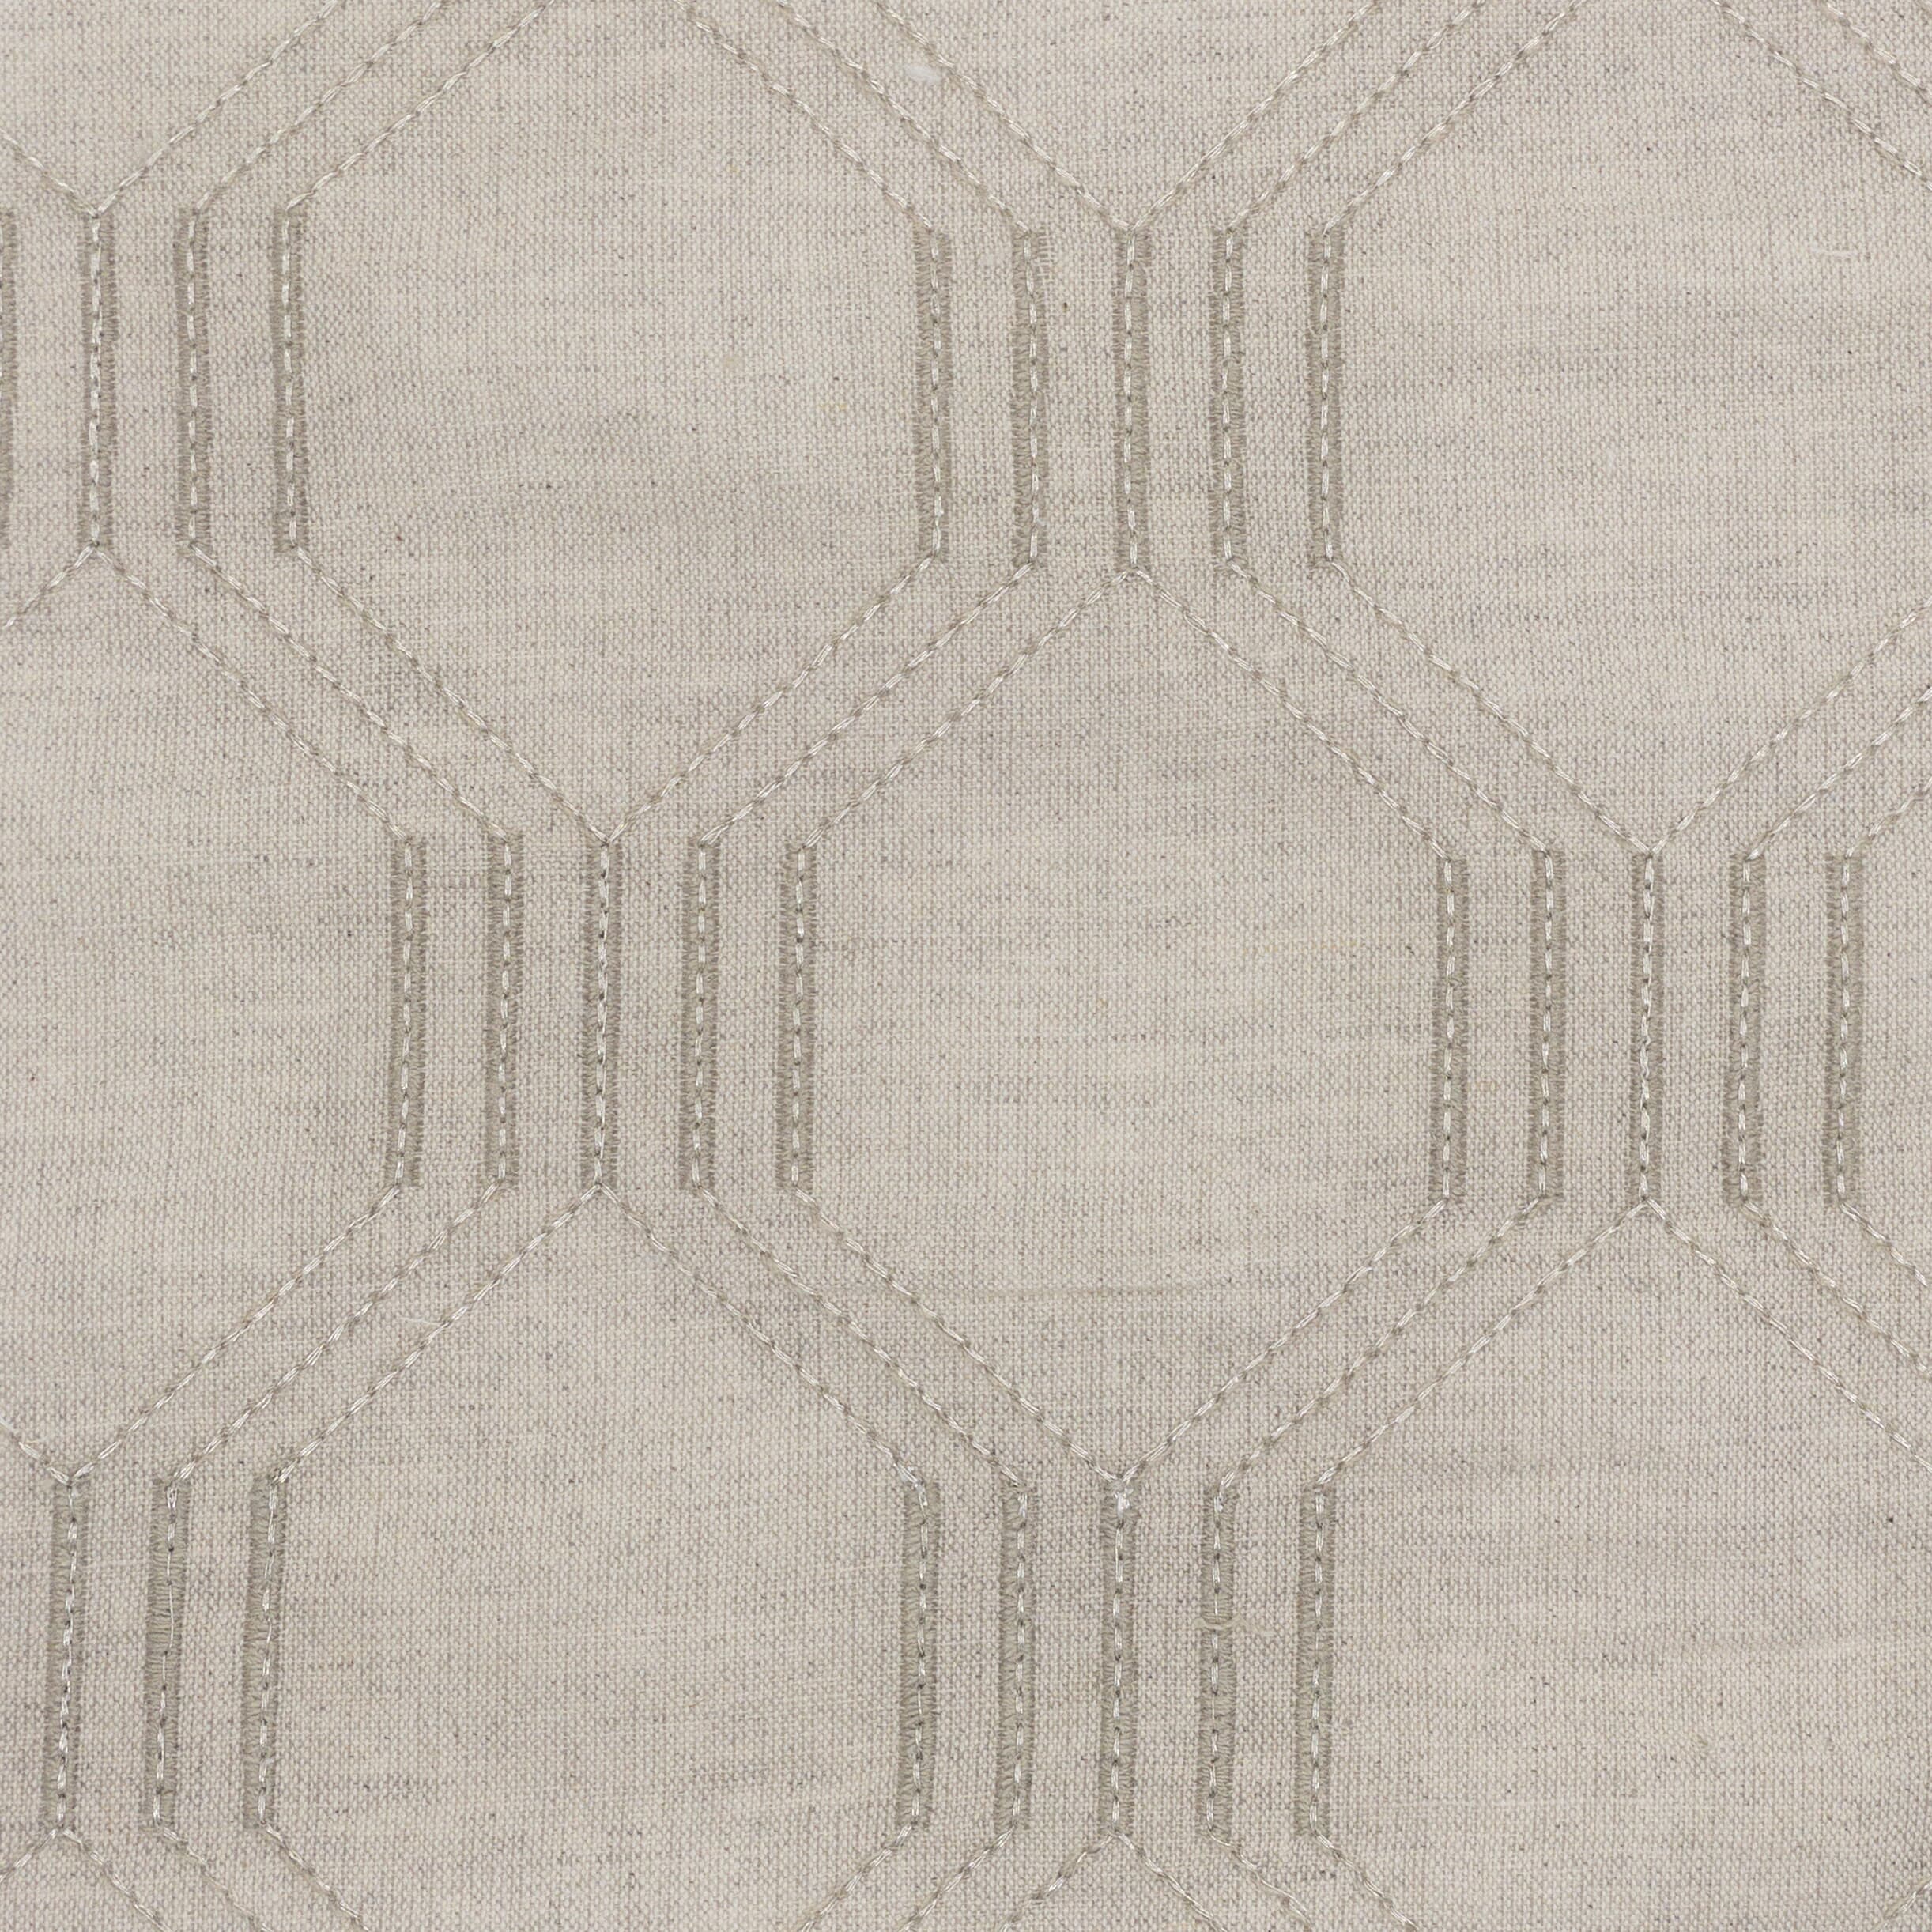 Afton 3 Burlap by Stout Fabric